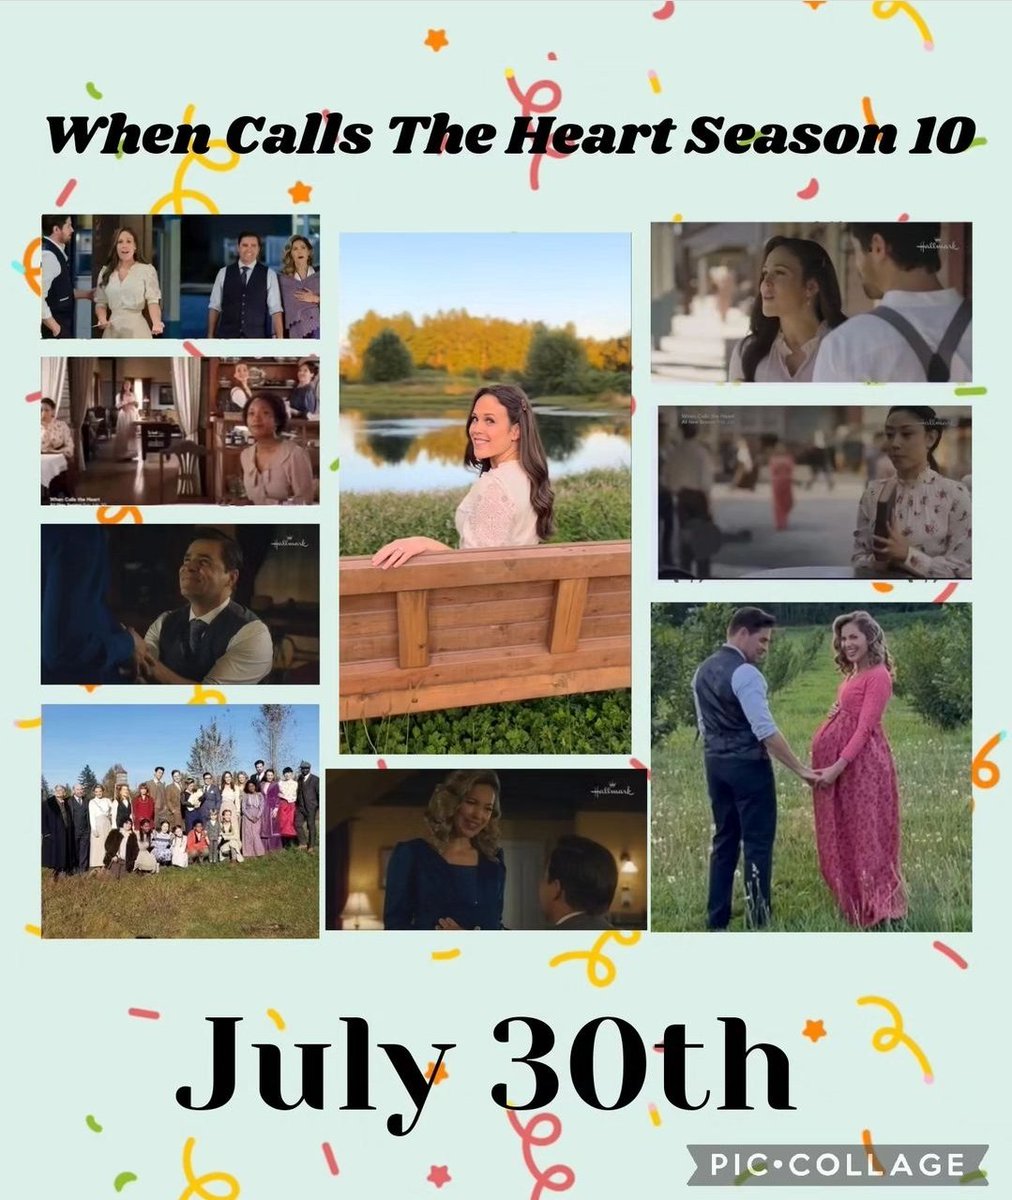 I'm getting more and more excited for season 10 to come. I can't wait. I really hope we get more sneak peeks soon #Hearties #wcth